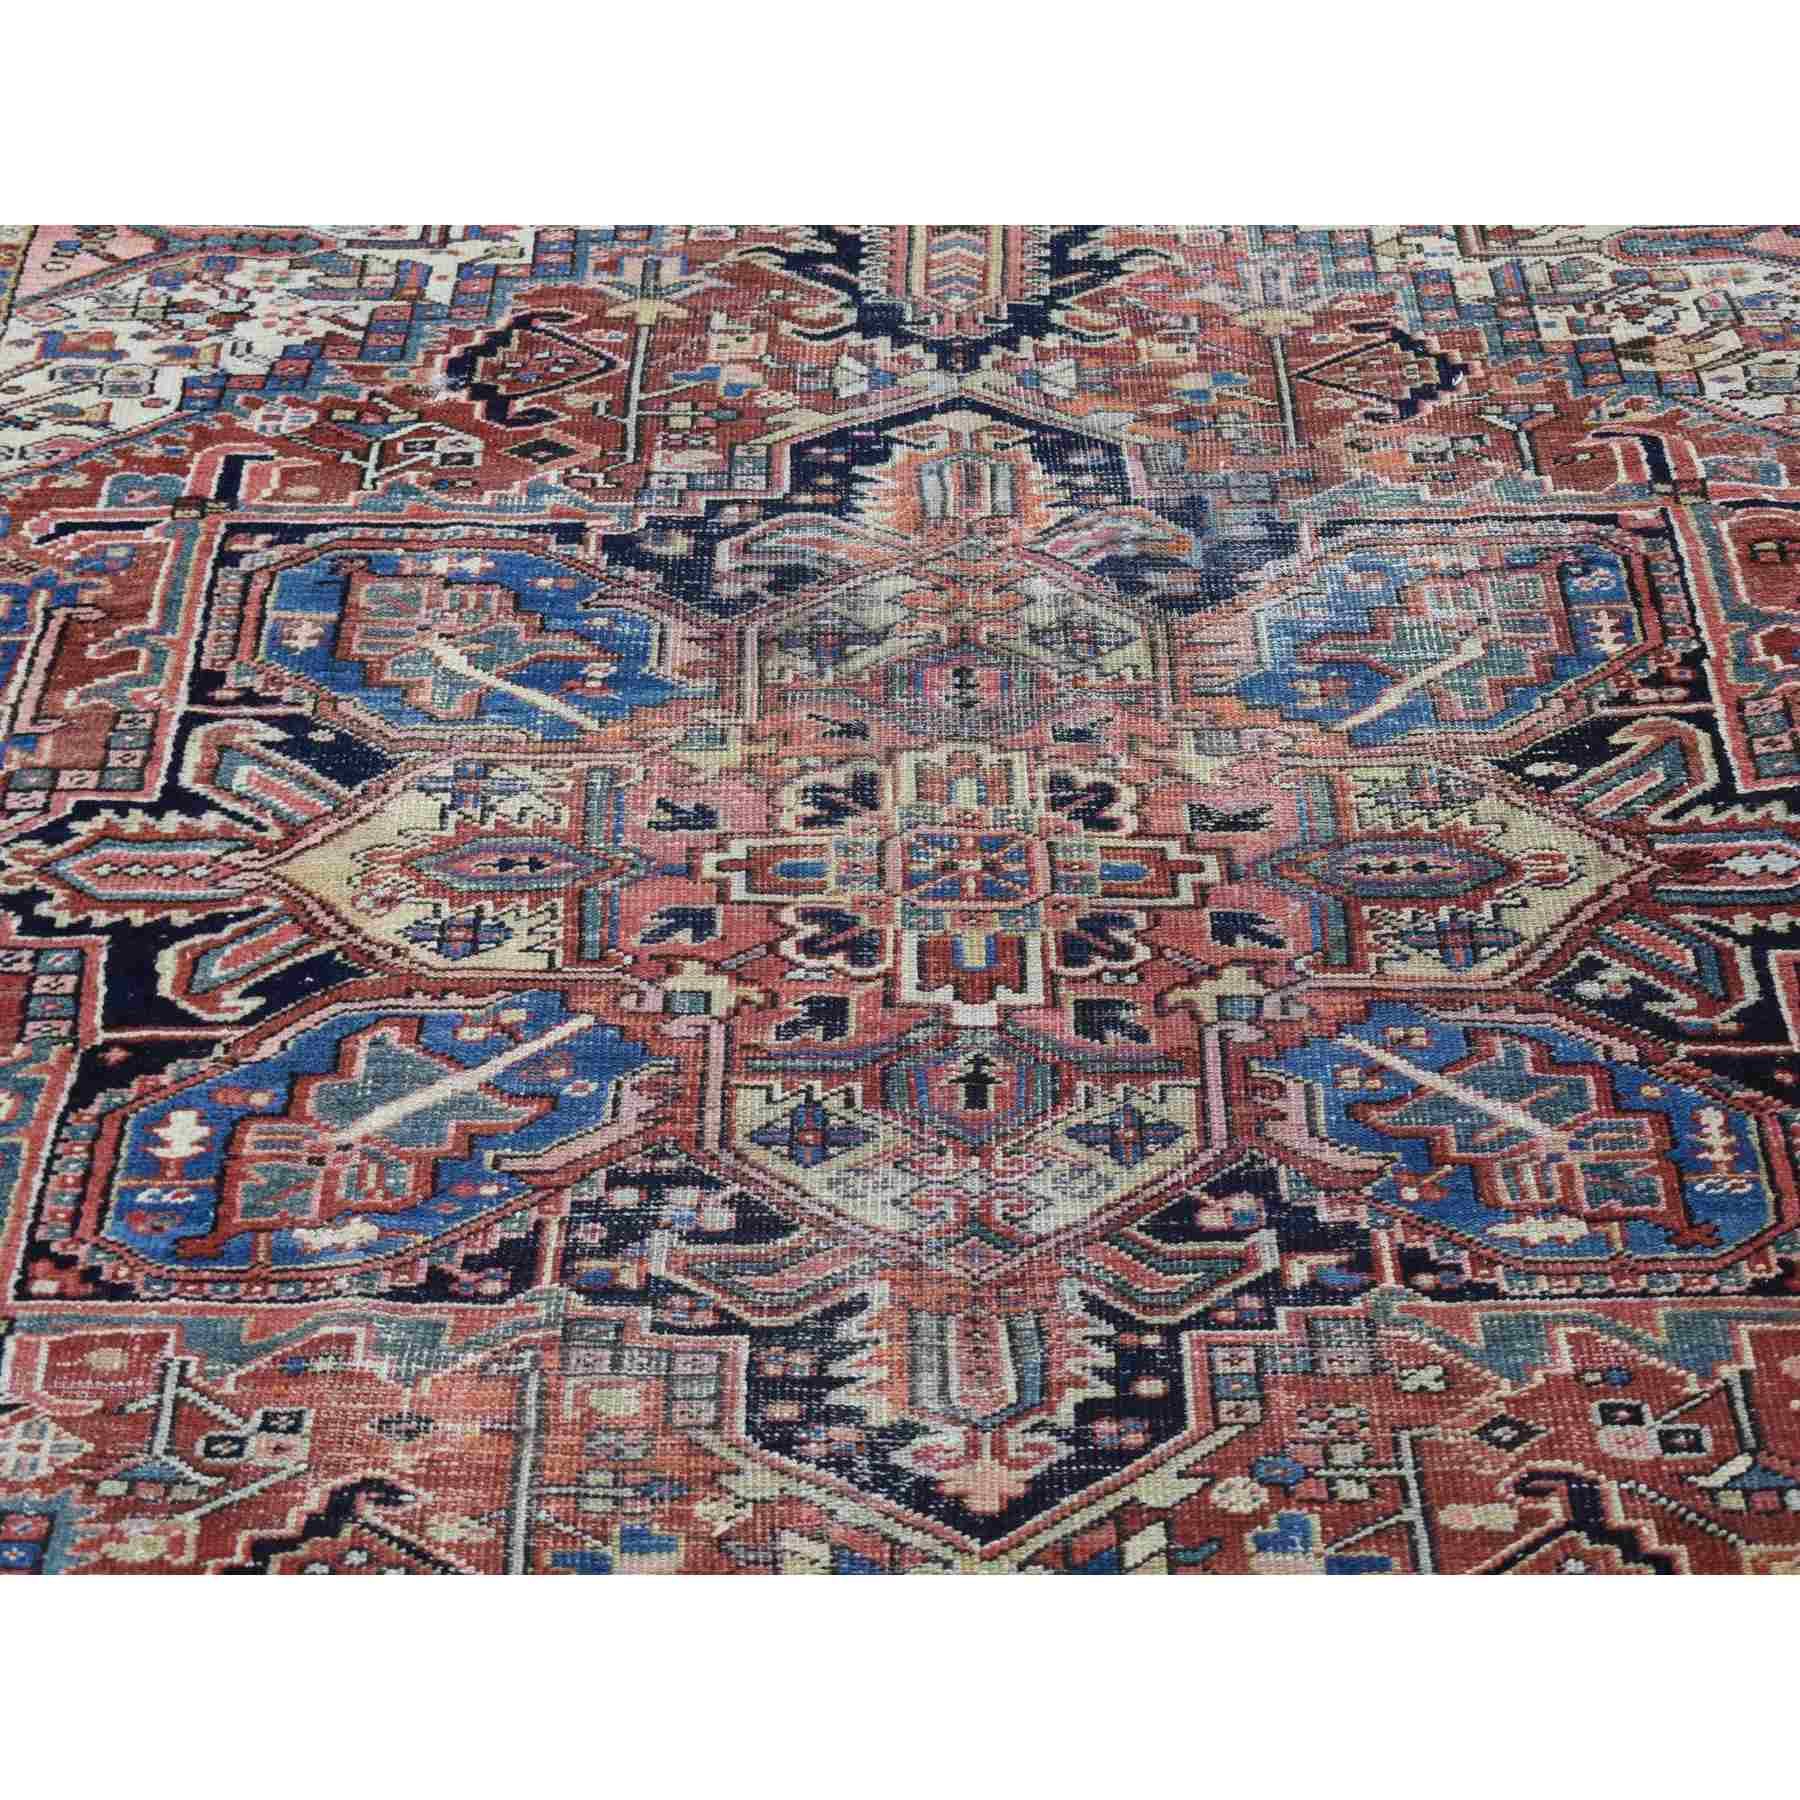 Antique-Hand-Knotted-Rug-400285